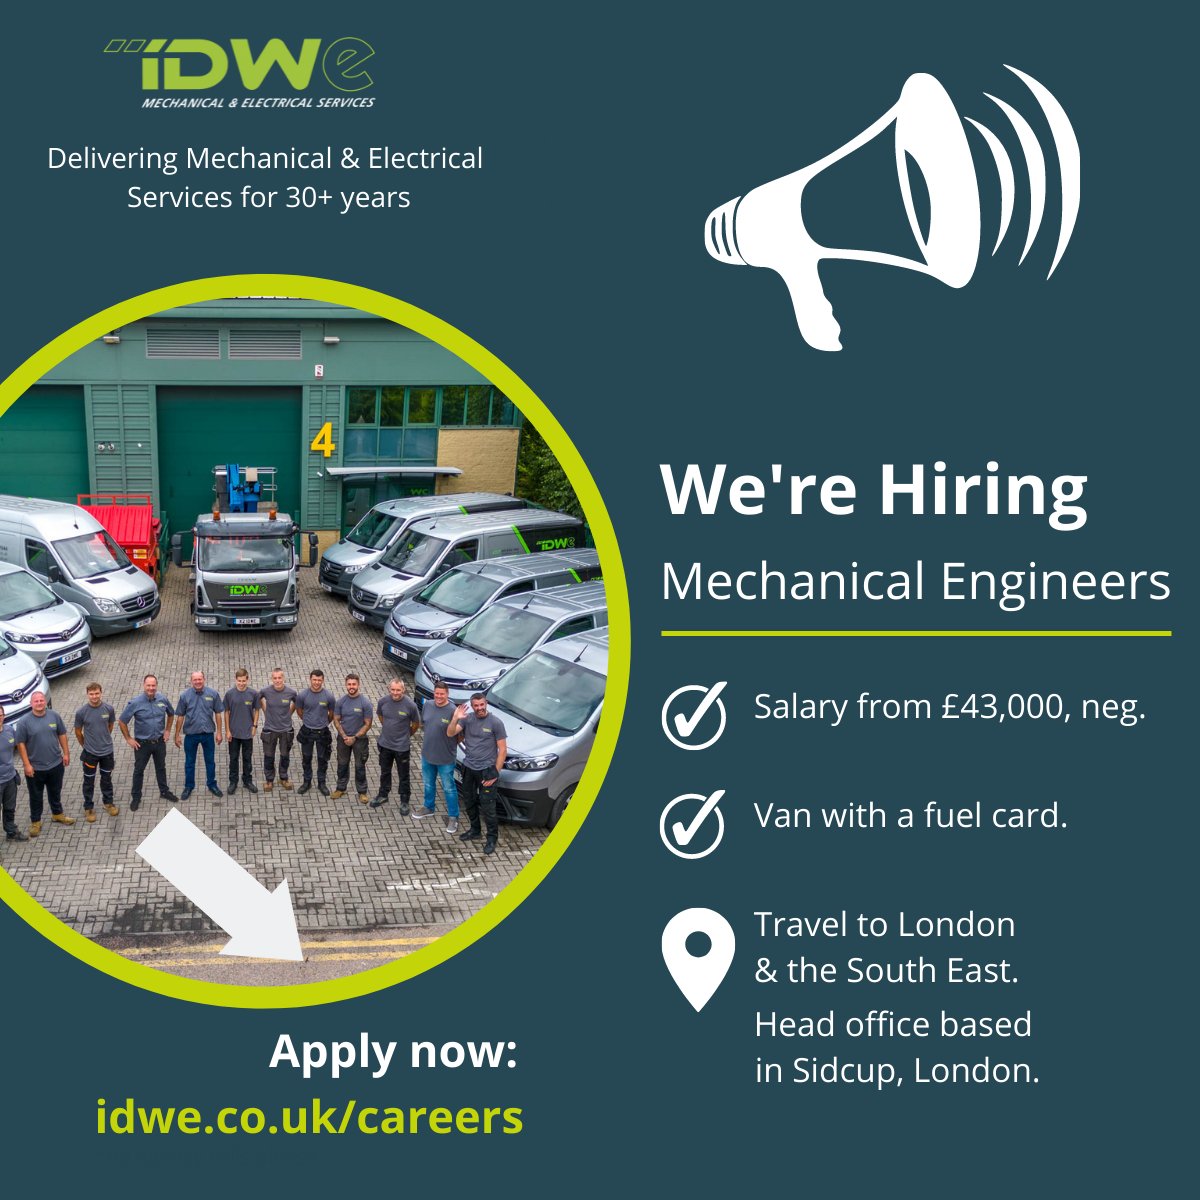 📢 Calling all engineers! 📢Would you be interested in joining a leading mechanical and electrical company? Come and join our friendly team. Please visit: idwe.co.uk/careers/ 
#engineeringjobs #mechanicalengineeringjobs #kentjobs #sevenoaksjobs #bromleyjobs #londonjobs